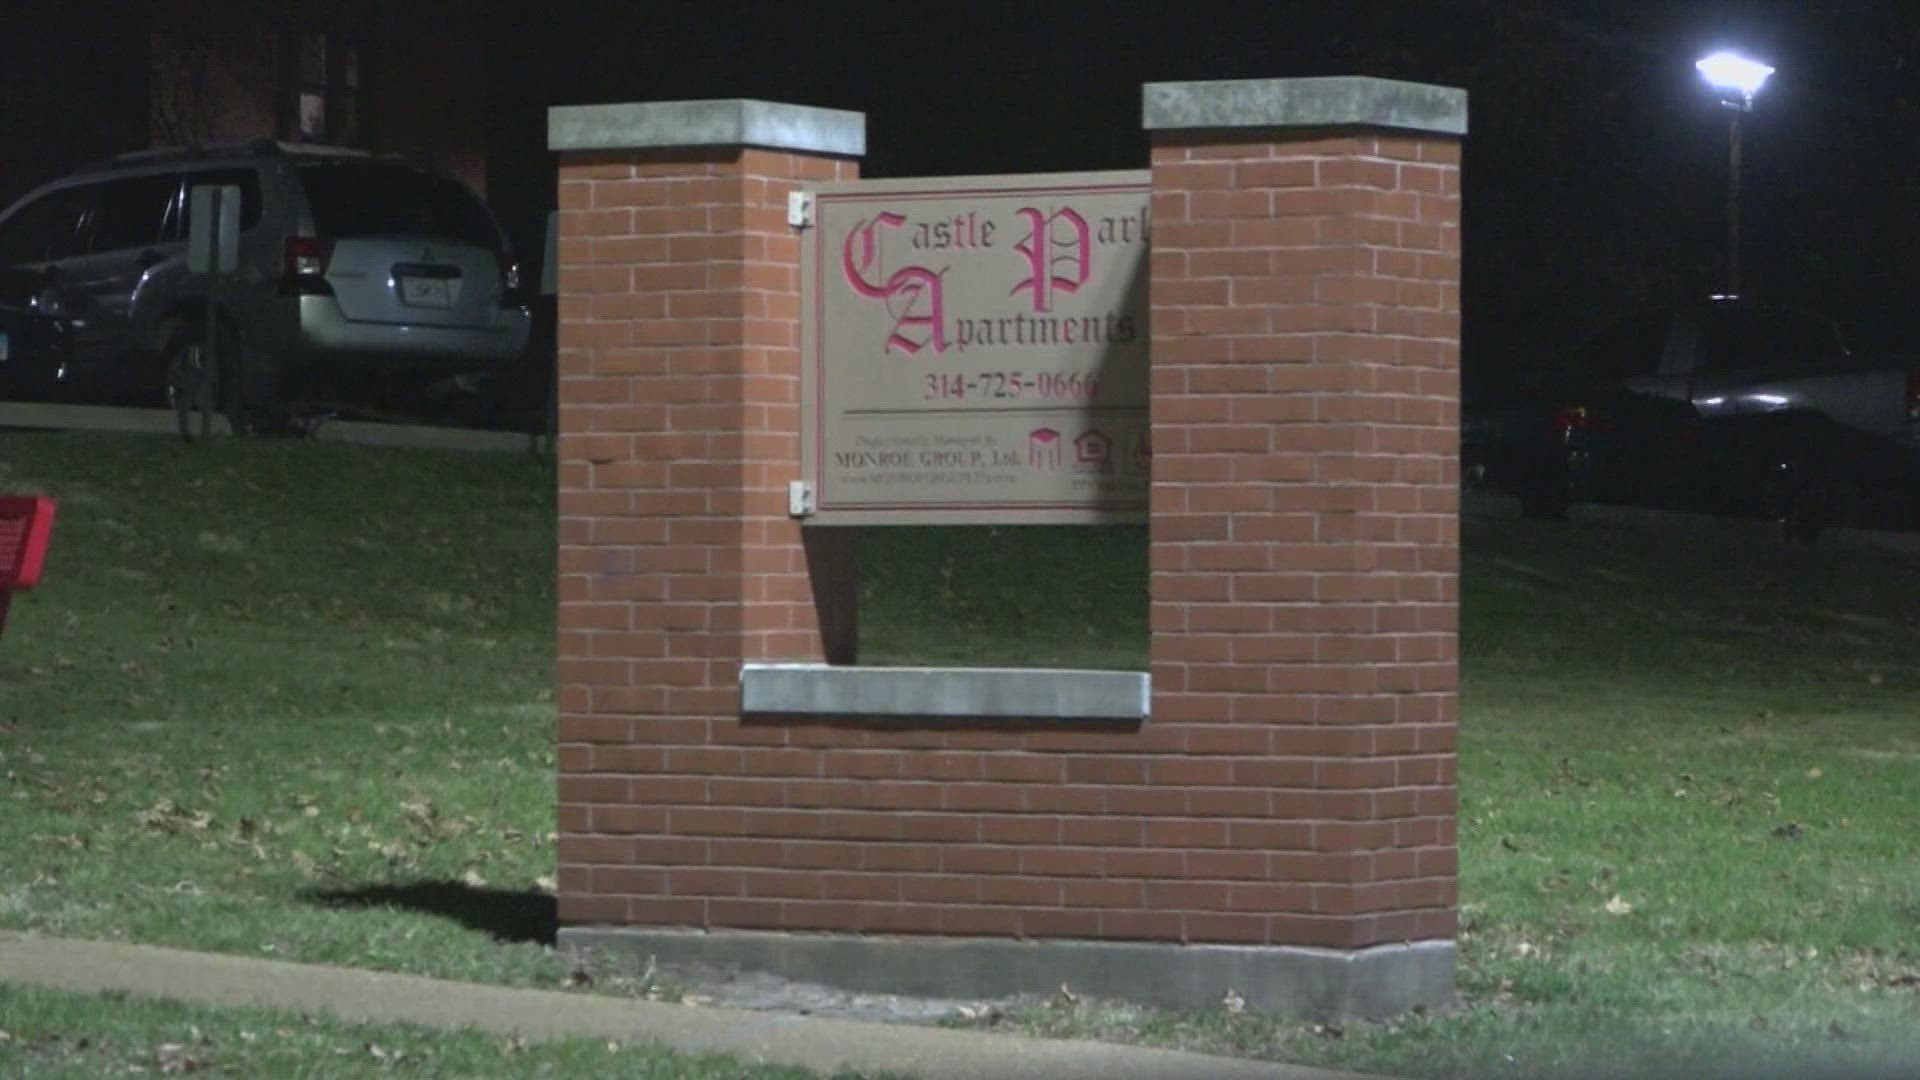 Investigators believe it started with a dispute inside Castle Park Apartments, located near St. Charles Rock Road.